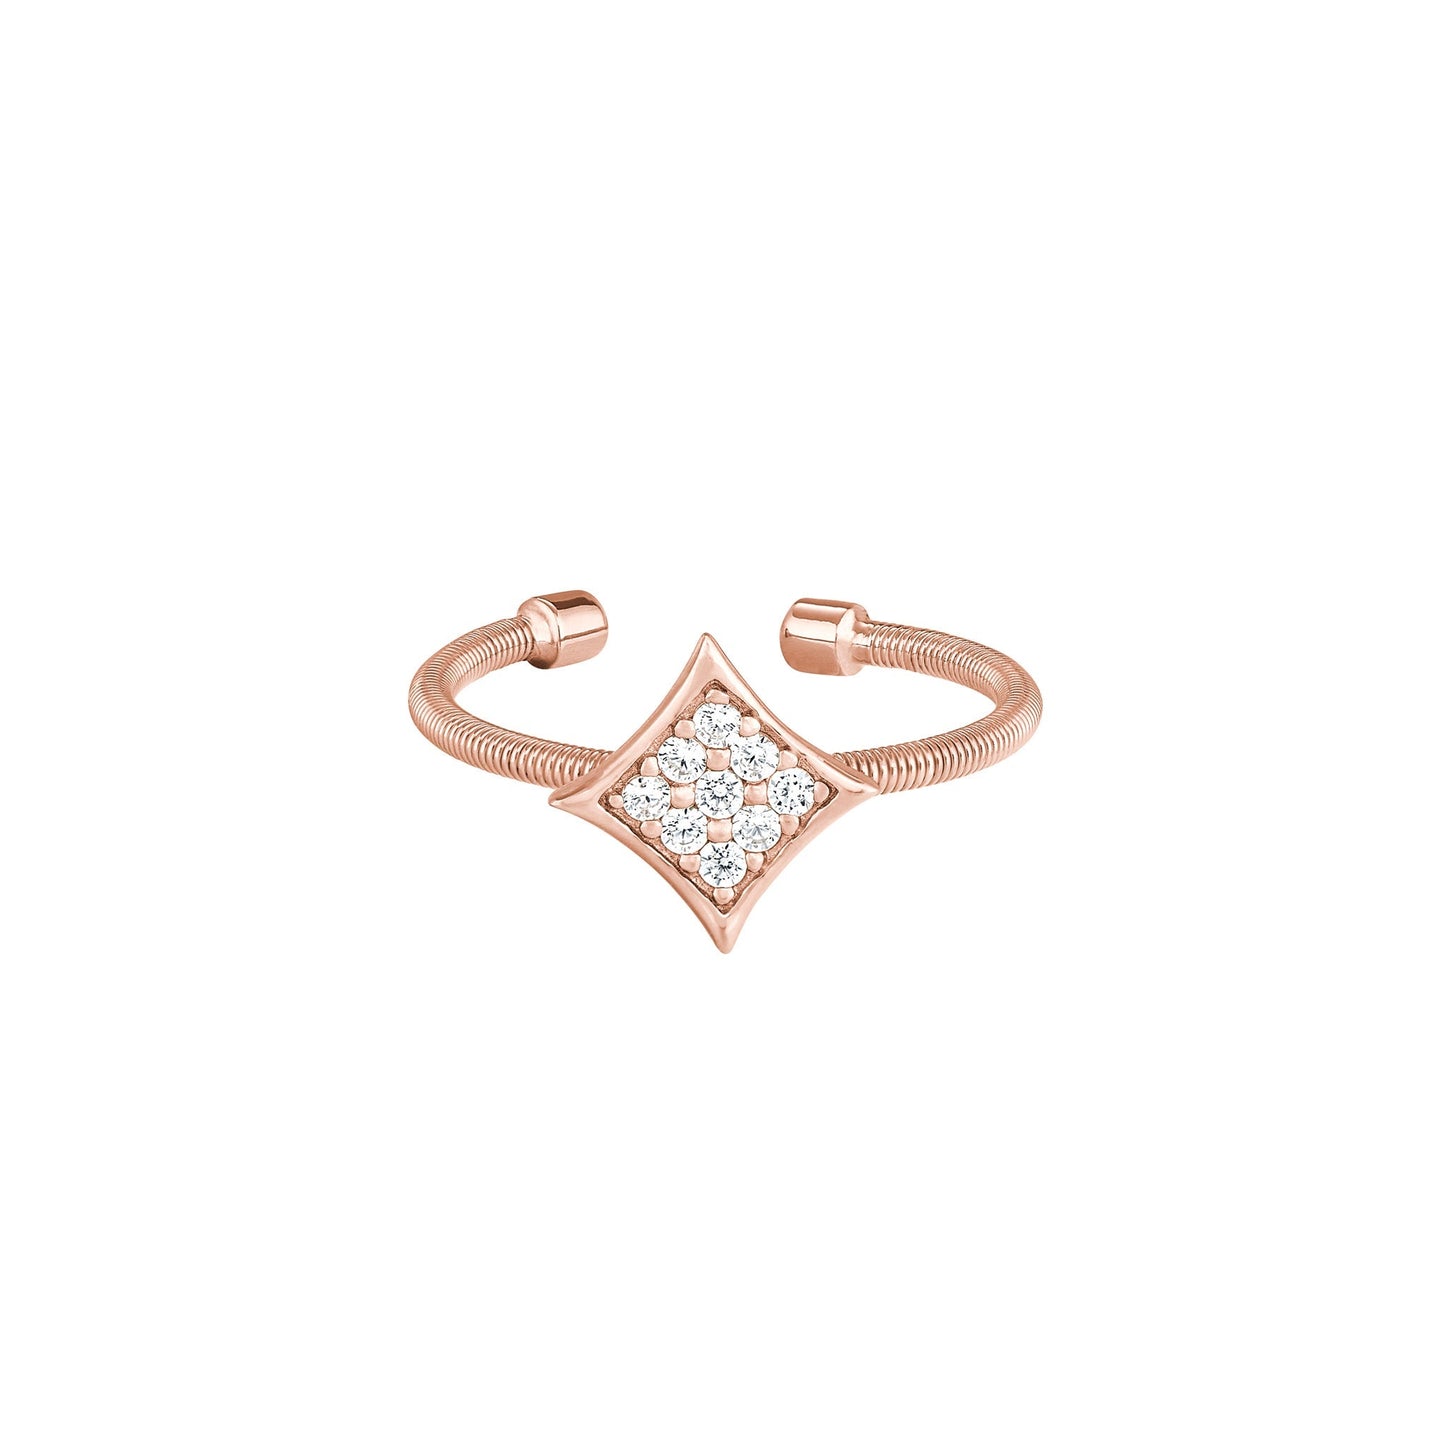 A cable diamond shaped ring with simulated diamonds displayed on a neutral white background.